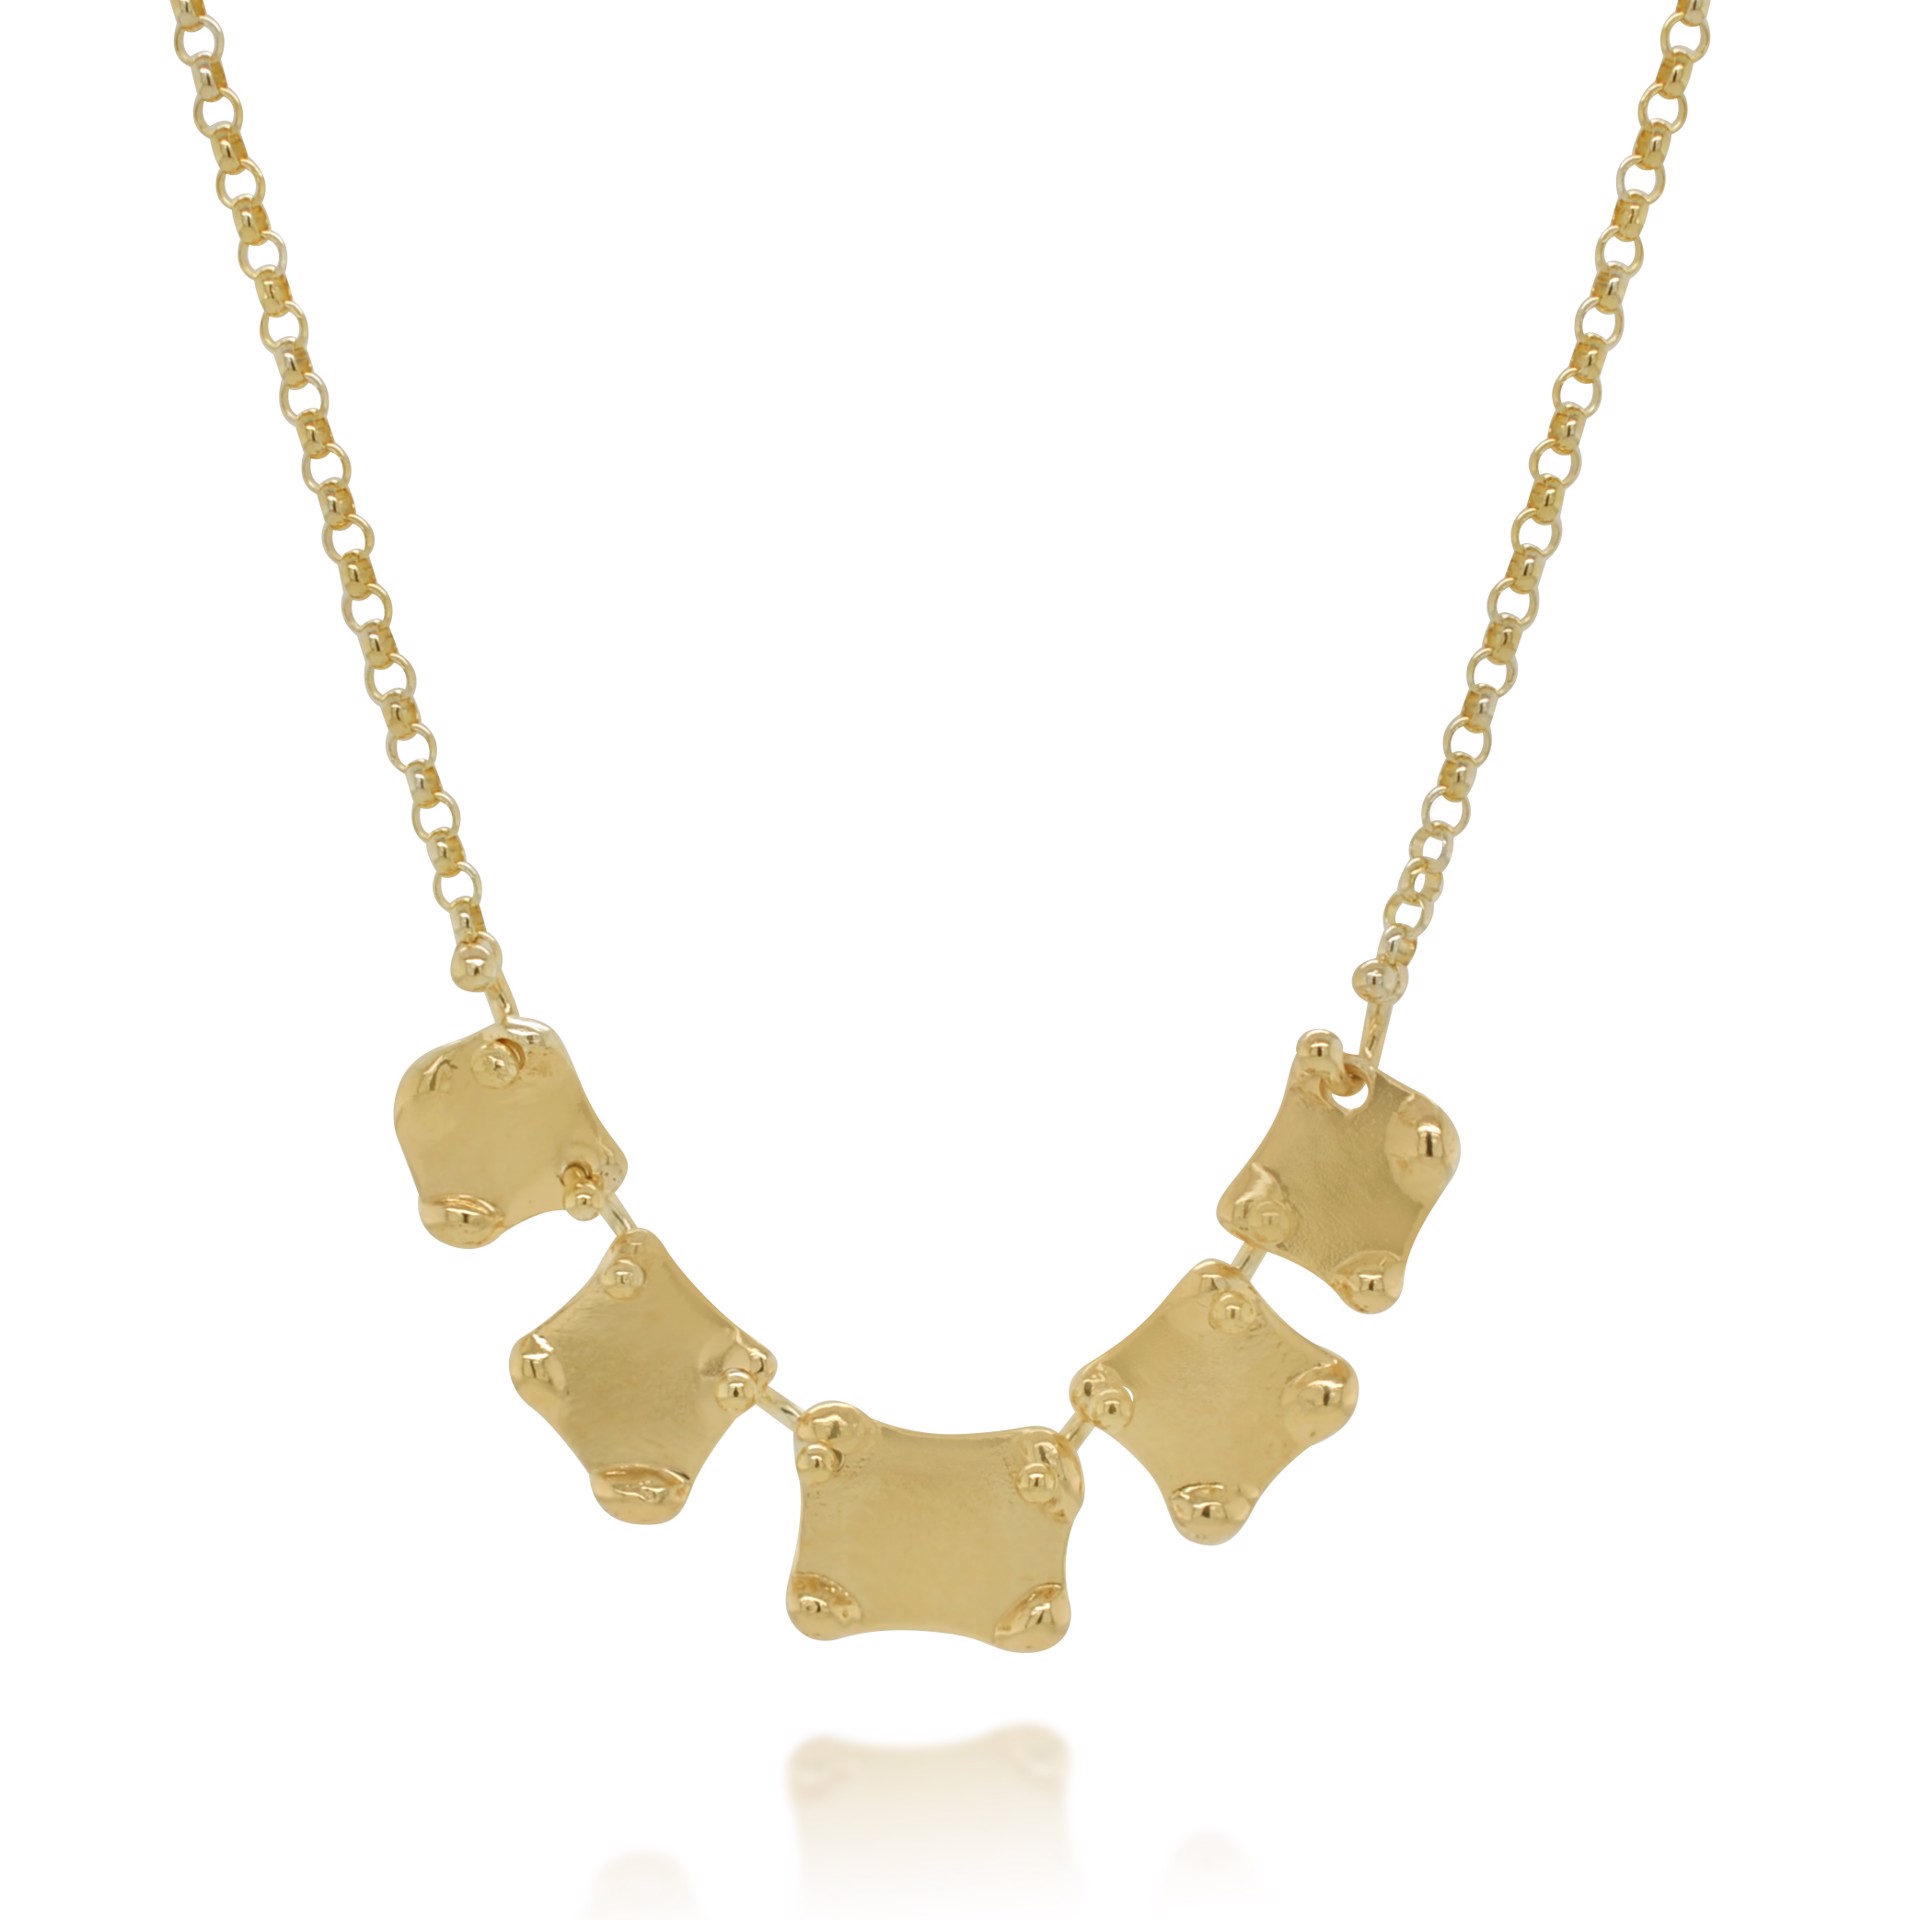 Seashell Speckle Necklace- 18k yellow gold by Kristen Baird